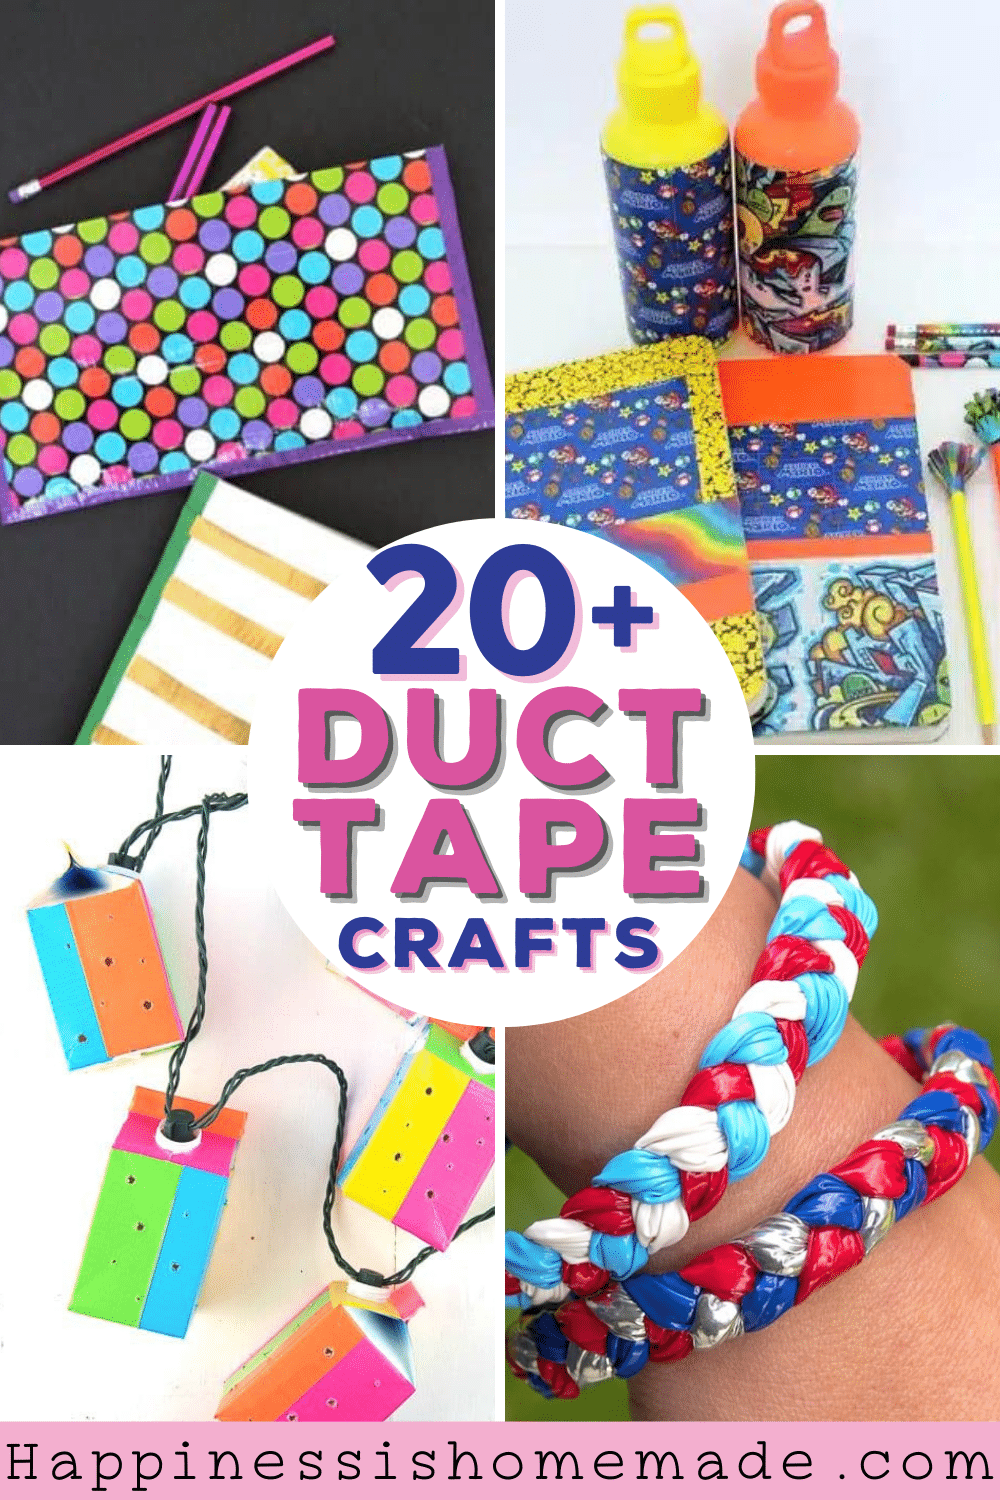 20+ duct tape crafts collage graphic